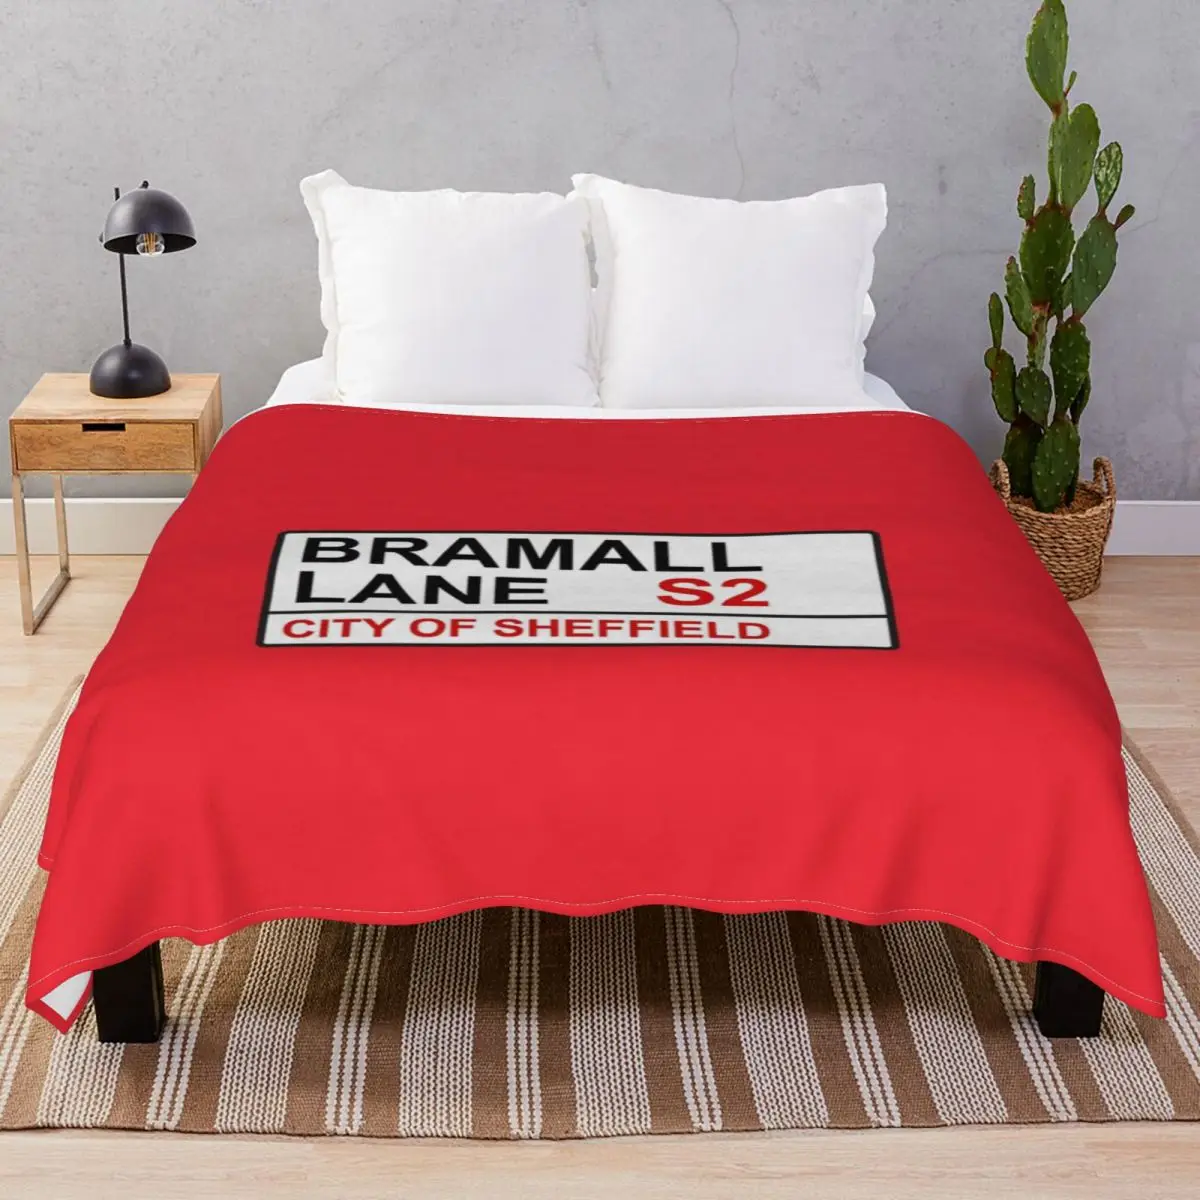 Bramall Lane Blanket Flannel Summer Soft Throw Blankets for Bedding Home Couch Camp Office